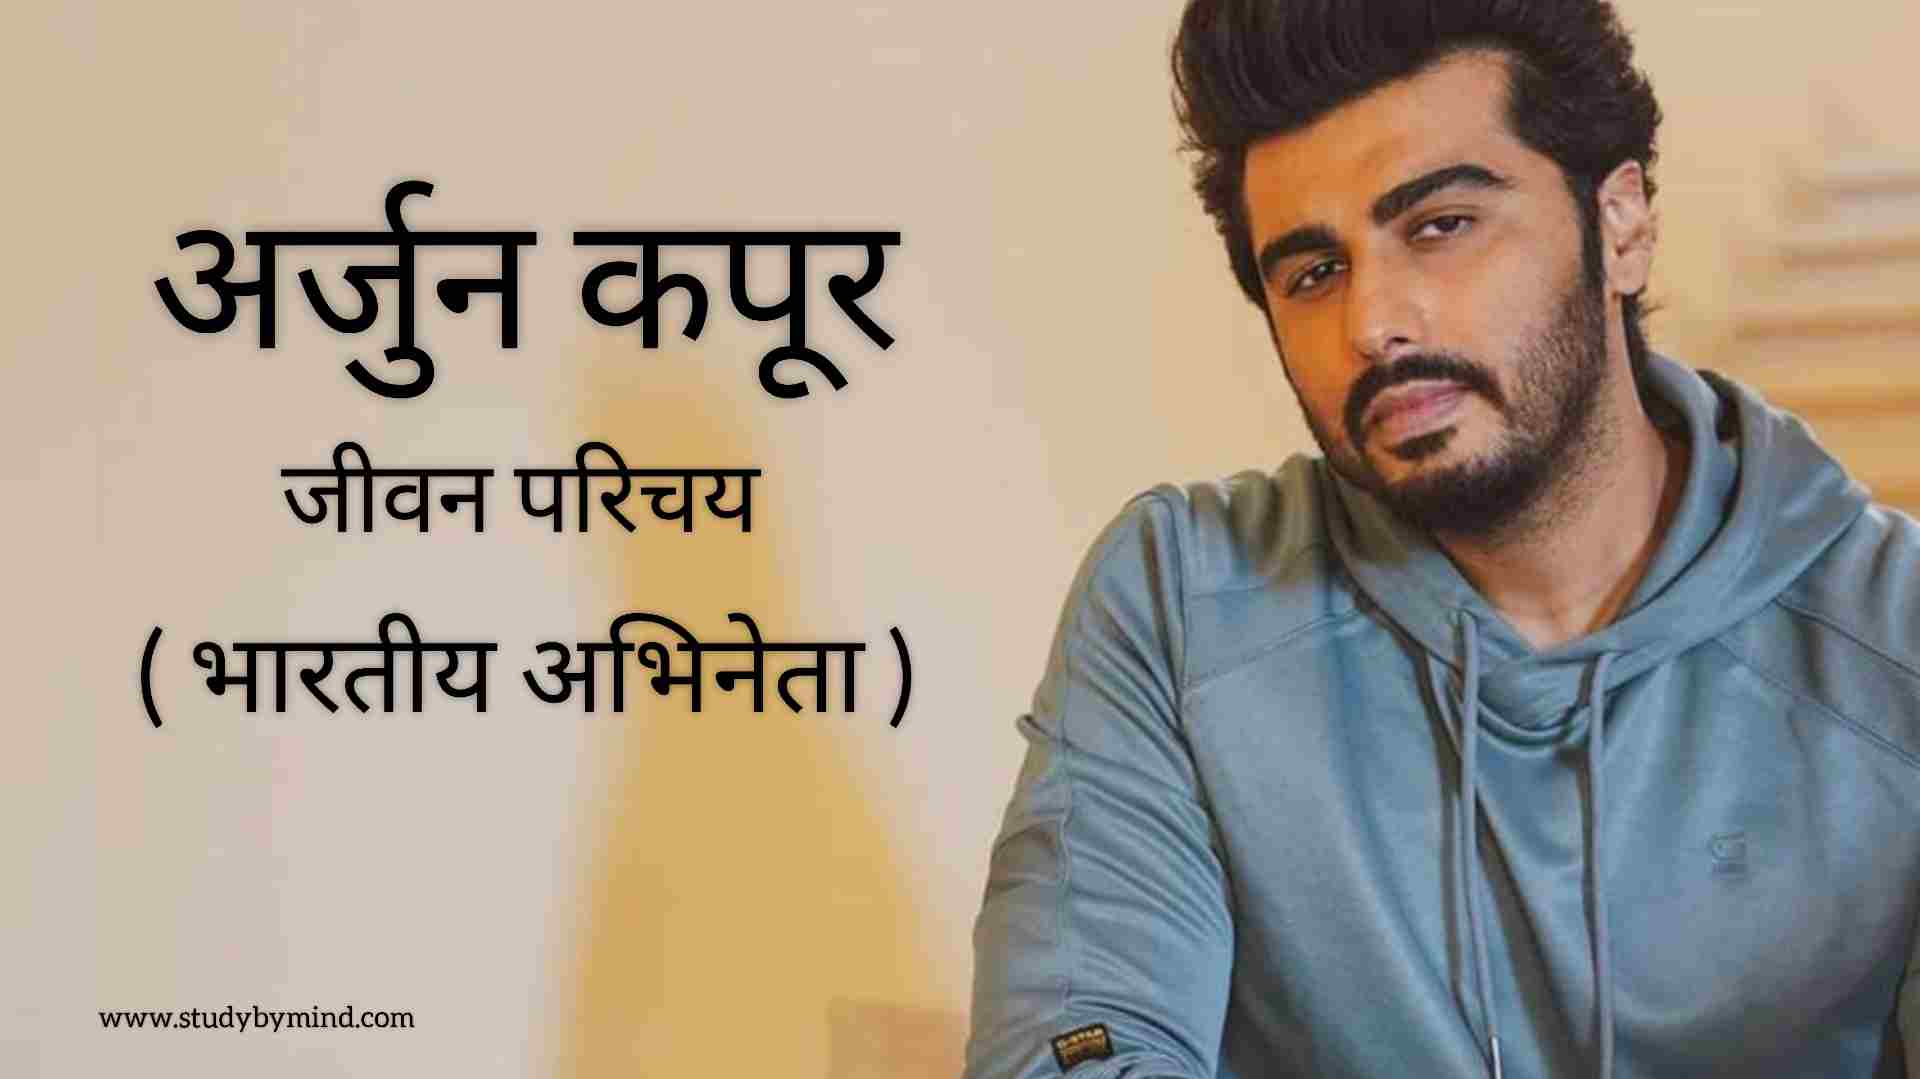 You are currently viewing अर्जुन कपूर जीवन परिचय Arjun Kapoor biography in Hindi